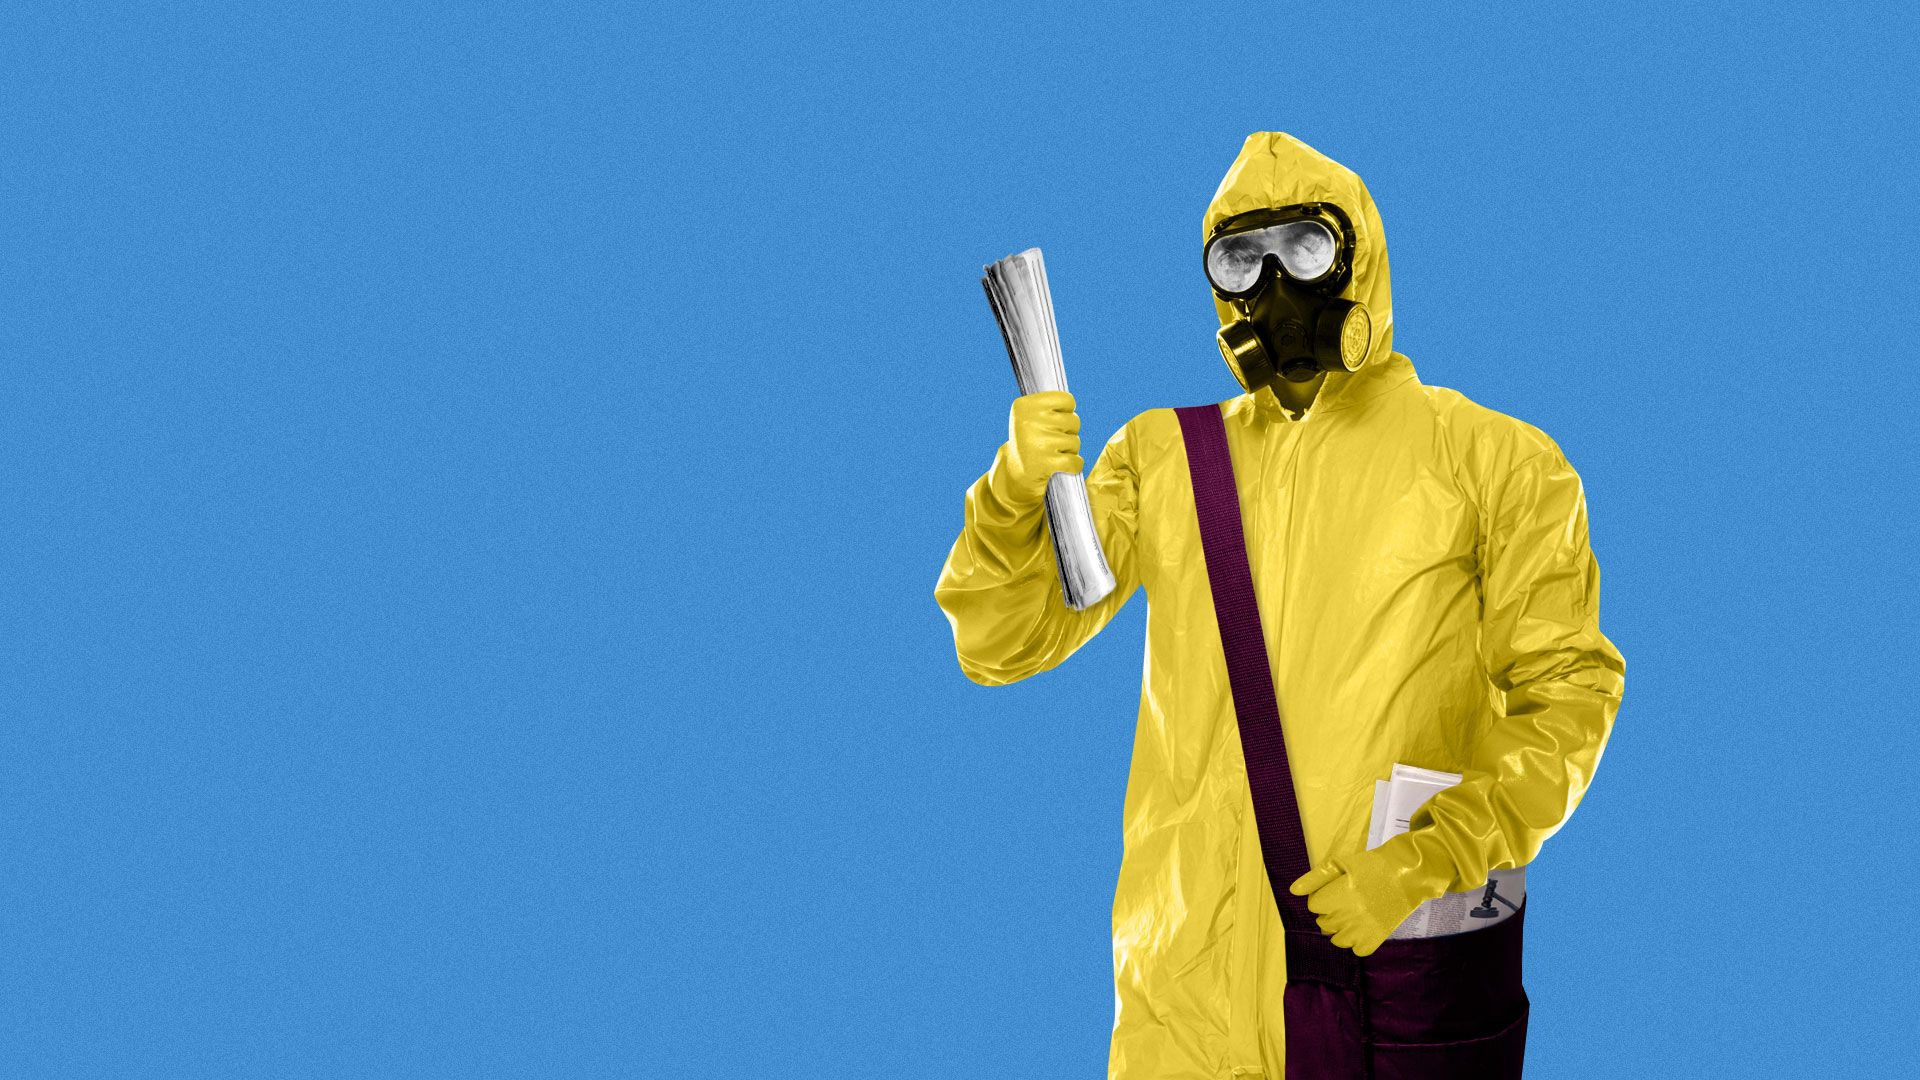 Illustration of a person in a hazmat suit as a paperboy holding a newspaper.